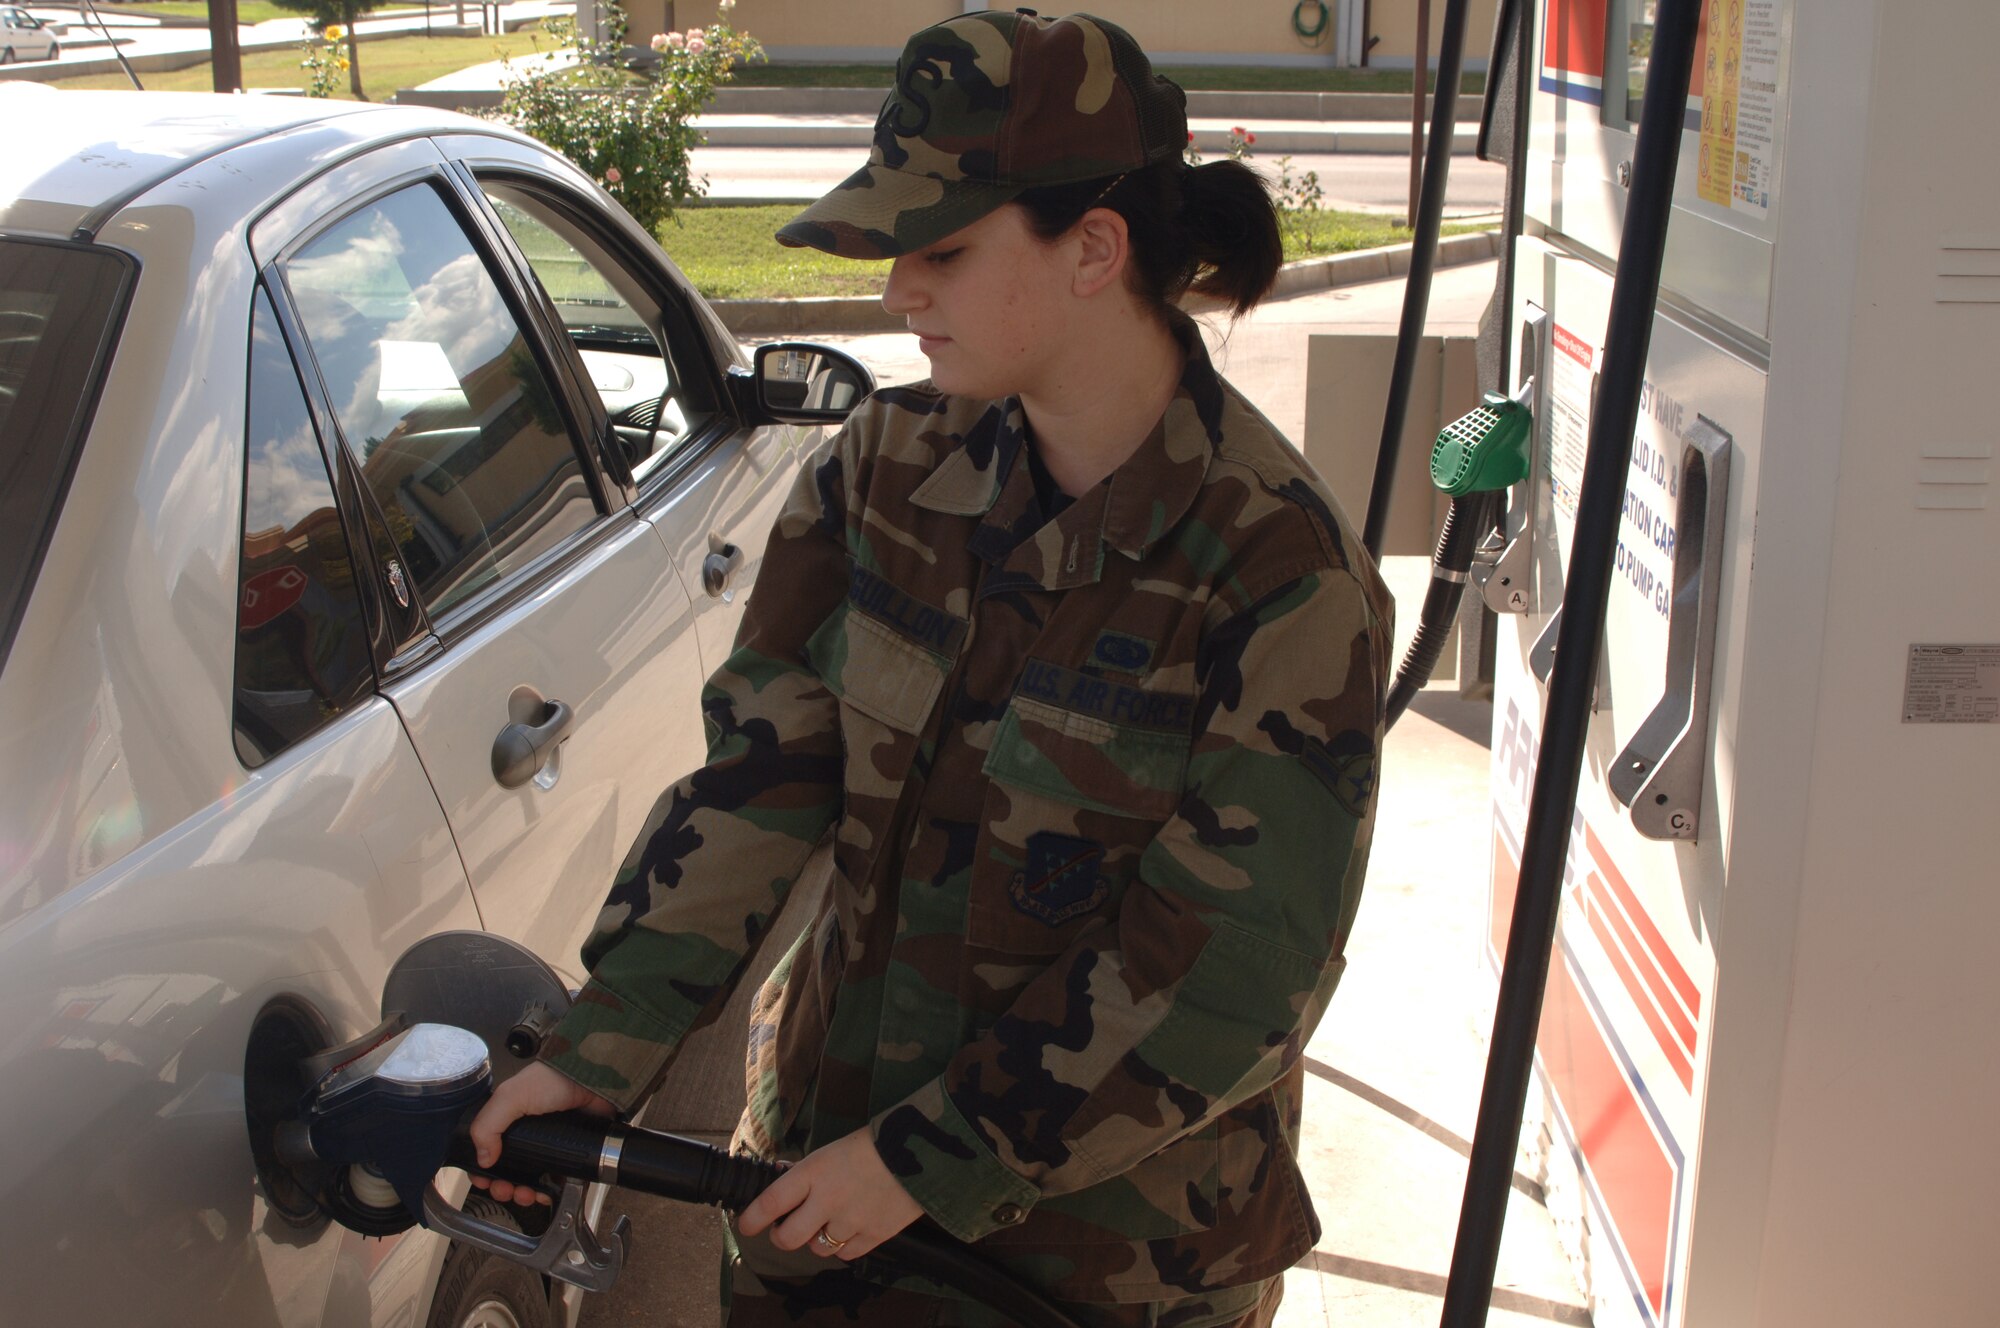 Airman Kelly Leguillon, 39th Communications Squadron, fills her tank up at the Incirlik Shoppette Nov. 2. In the month of November gas prices around Europe are set to decrease an average of 23 cents. (U.S. AIr Force photo by Airman 1st Class Nathan Lipscomb)